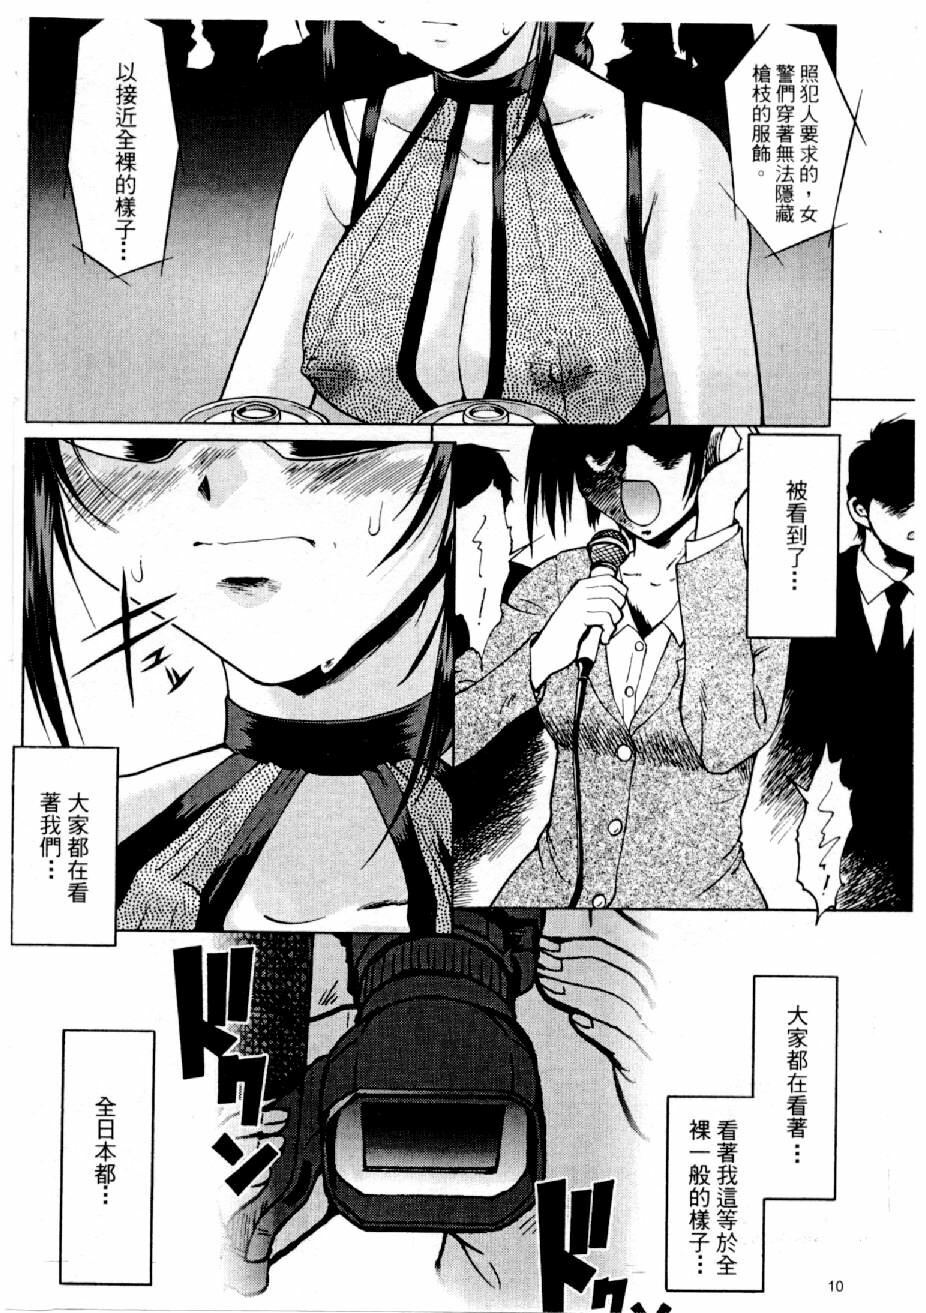 [Mizuno Kei] Cutie Police Woman 2 (You're Under Arrest) [Chinese] page 11 full